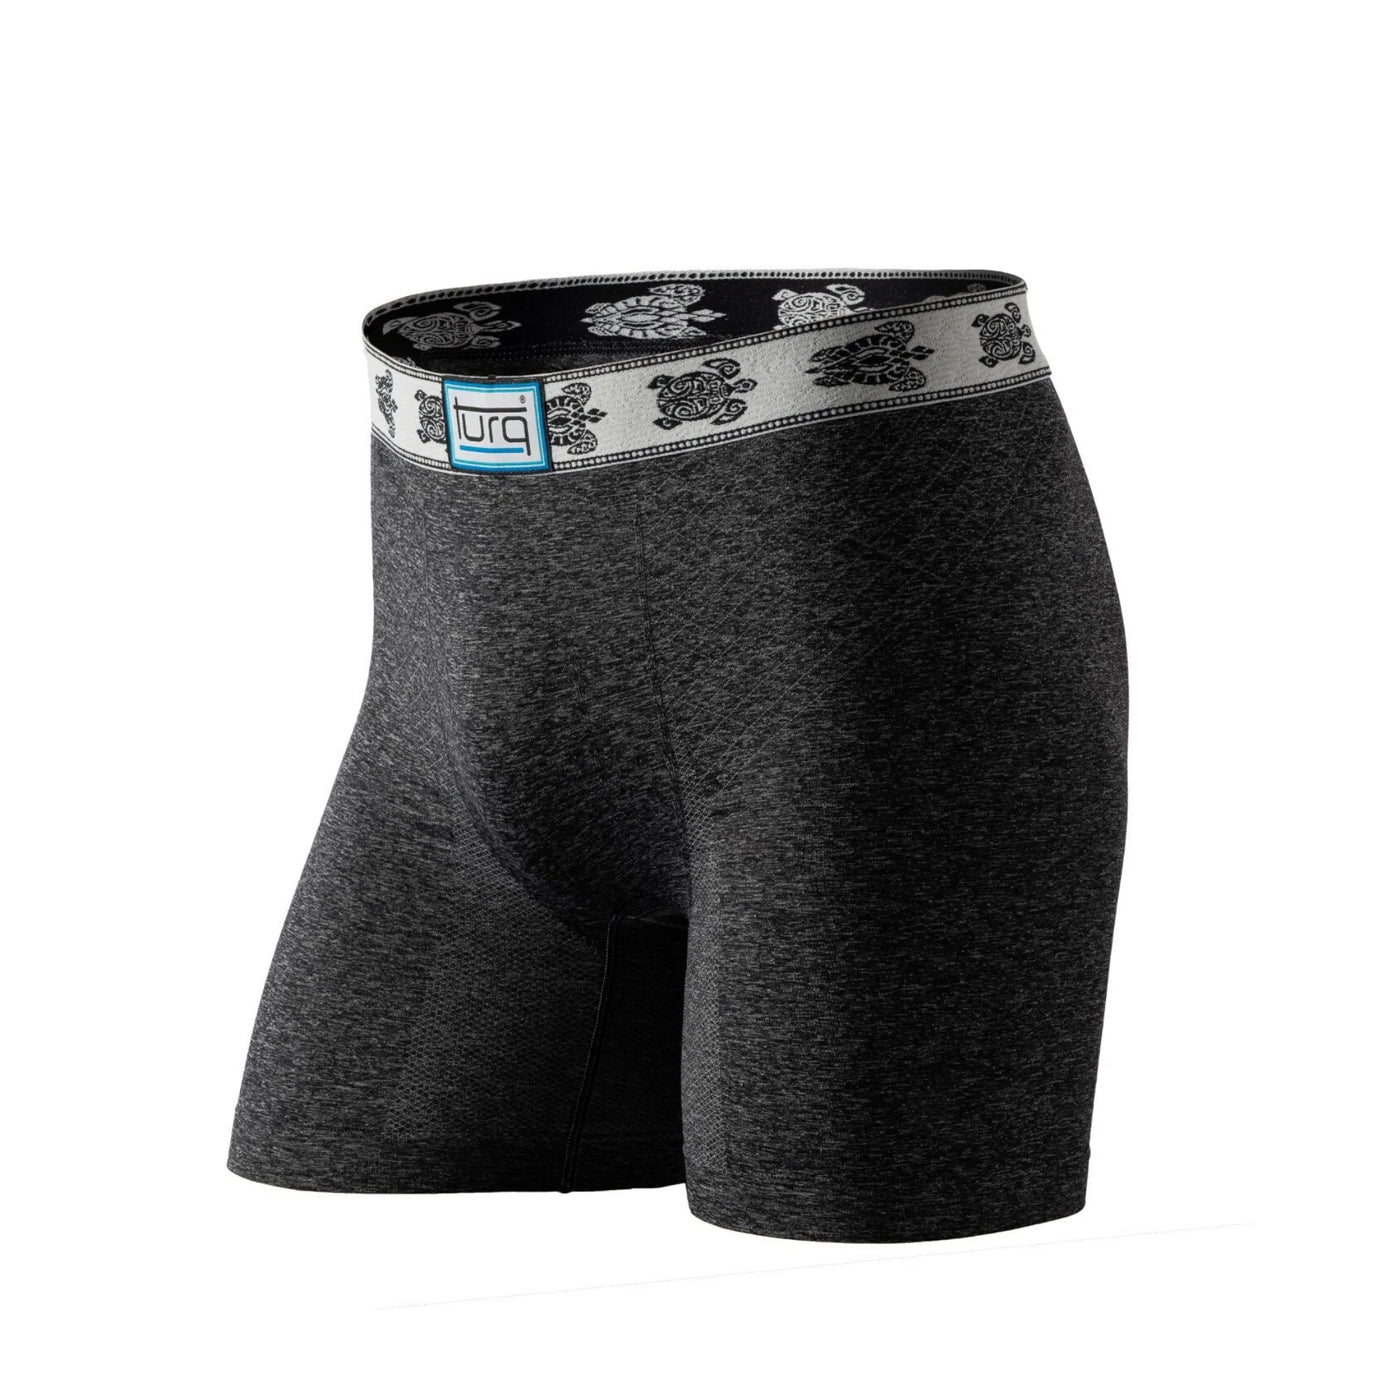 Crushed grey boxer briefs with embroidered black and white turtle waistband